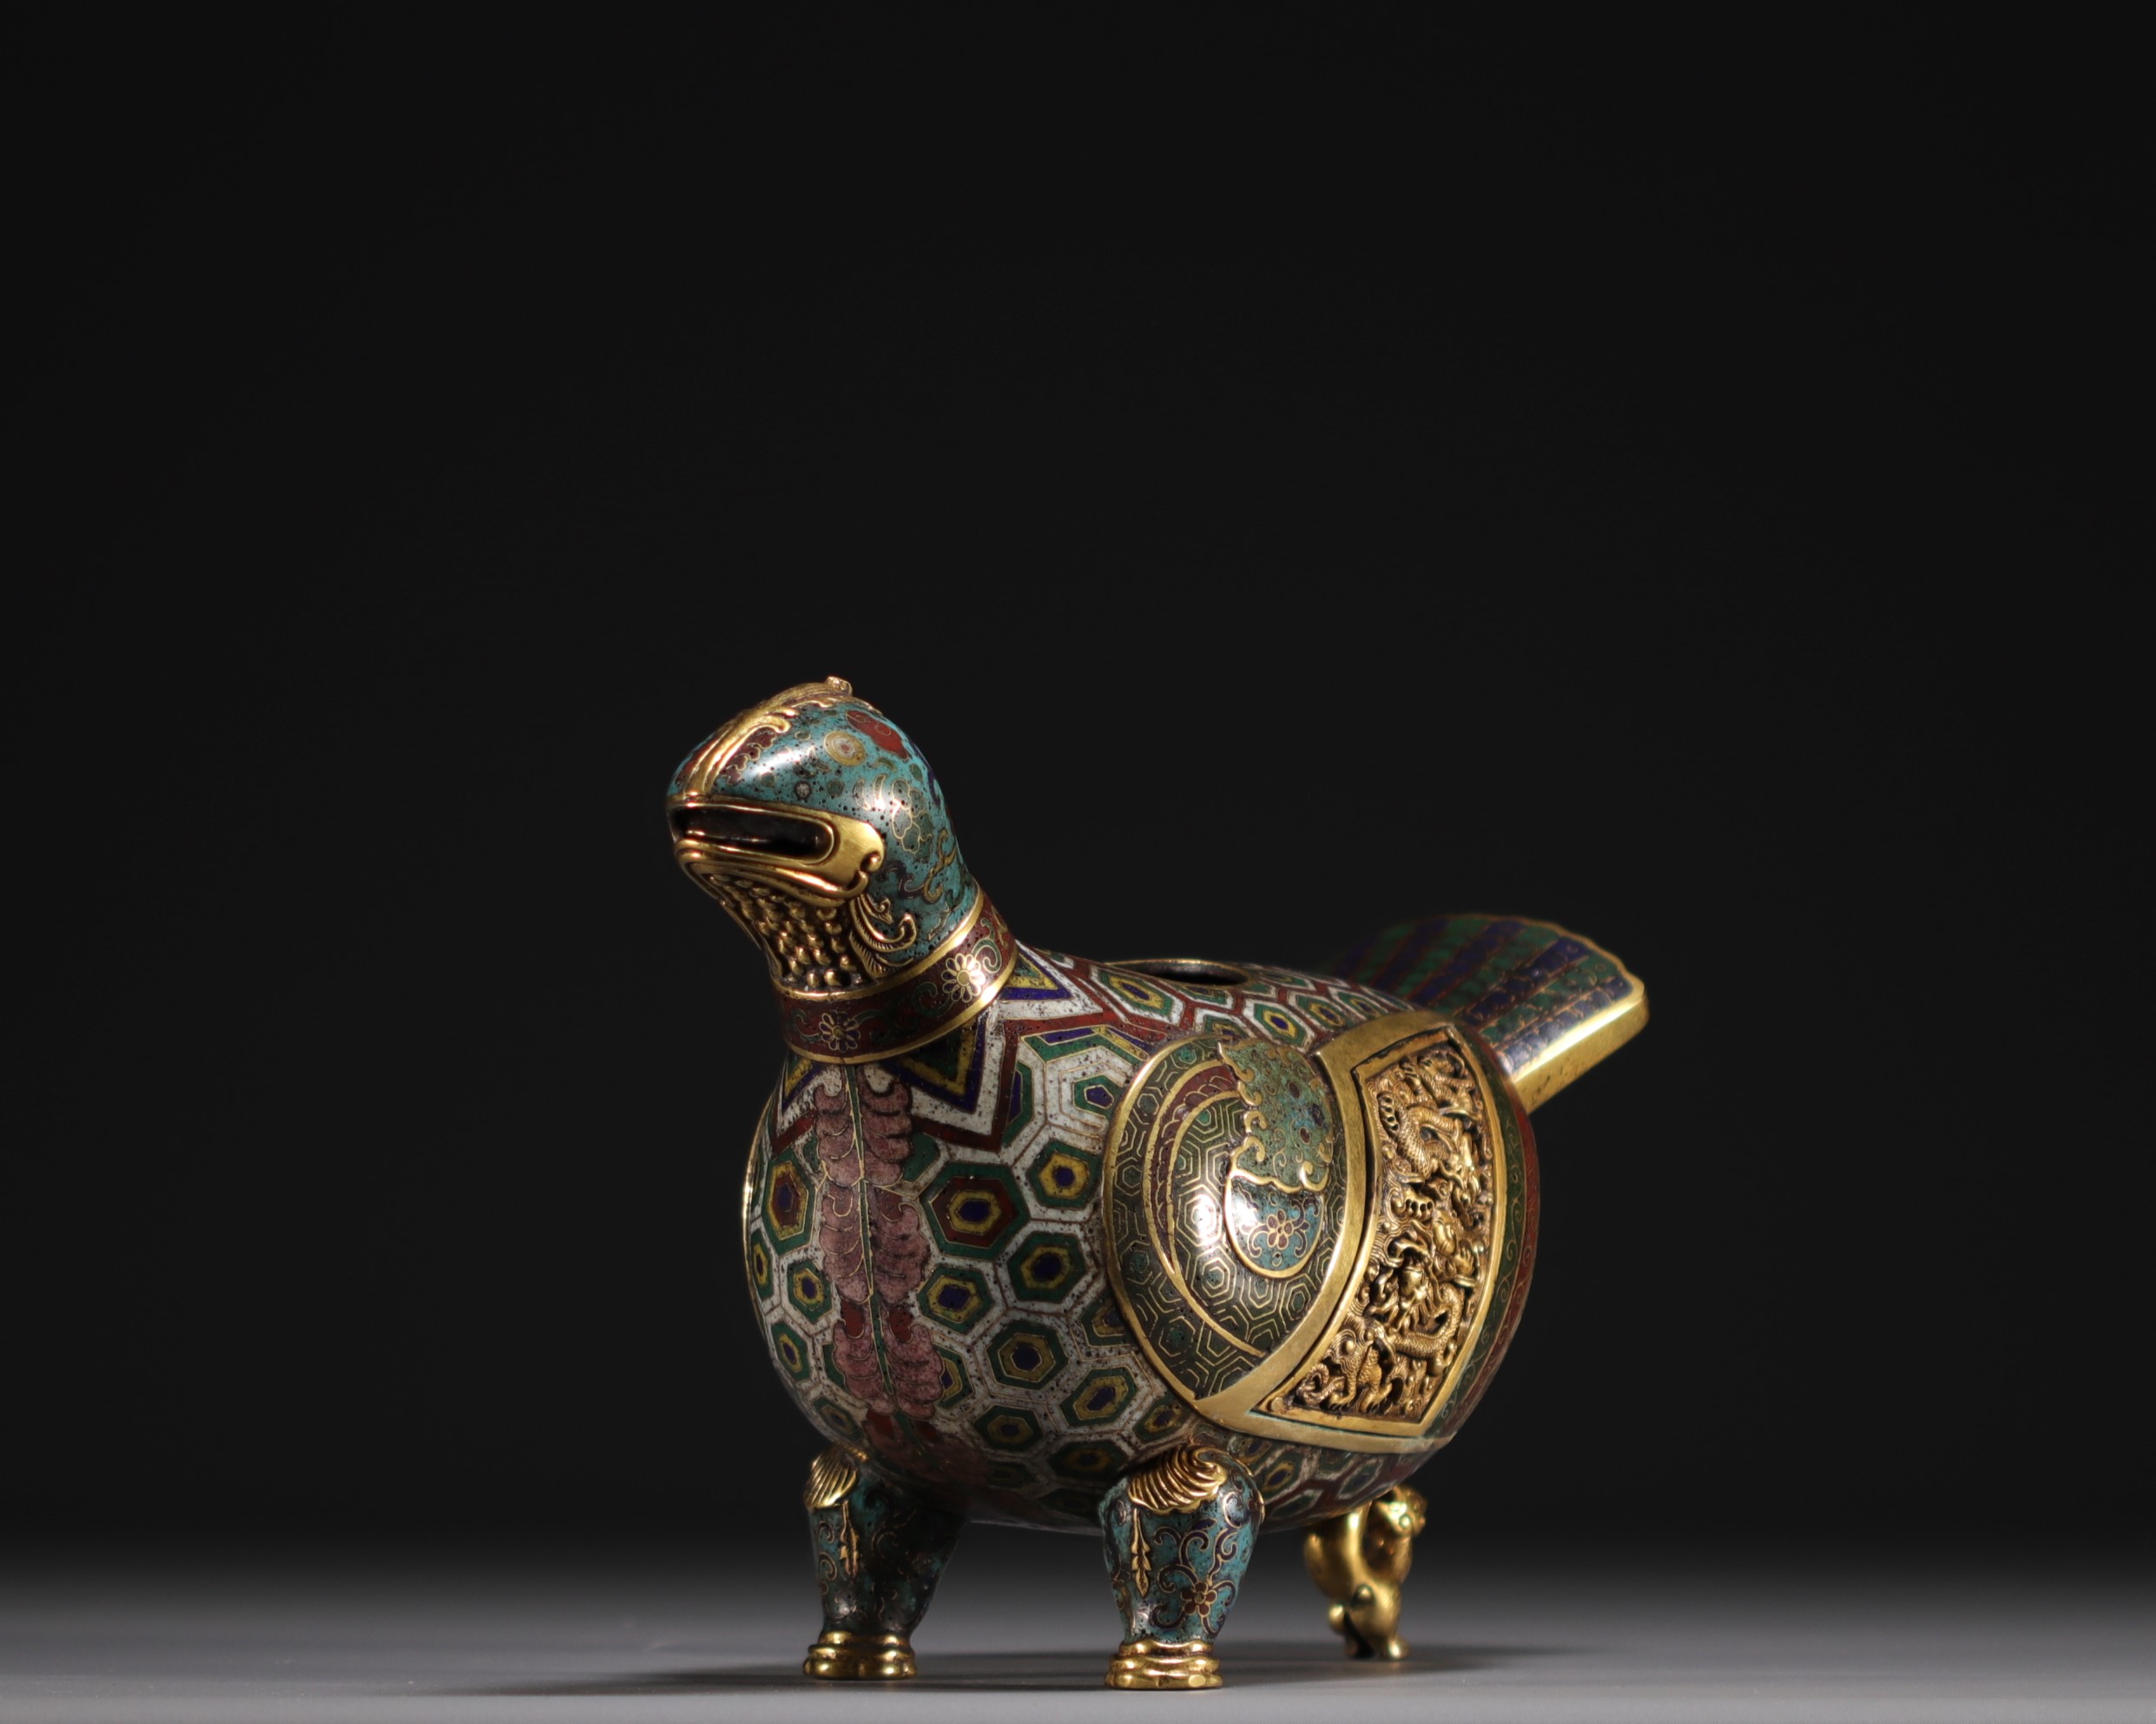 China - Bird-shaped cloisonne bronze perfume burner decorated with dragons, 18th century. - Image 3 of 7